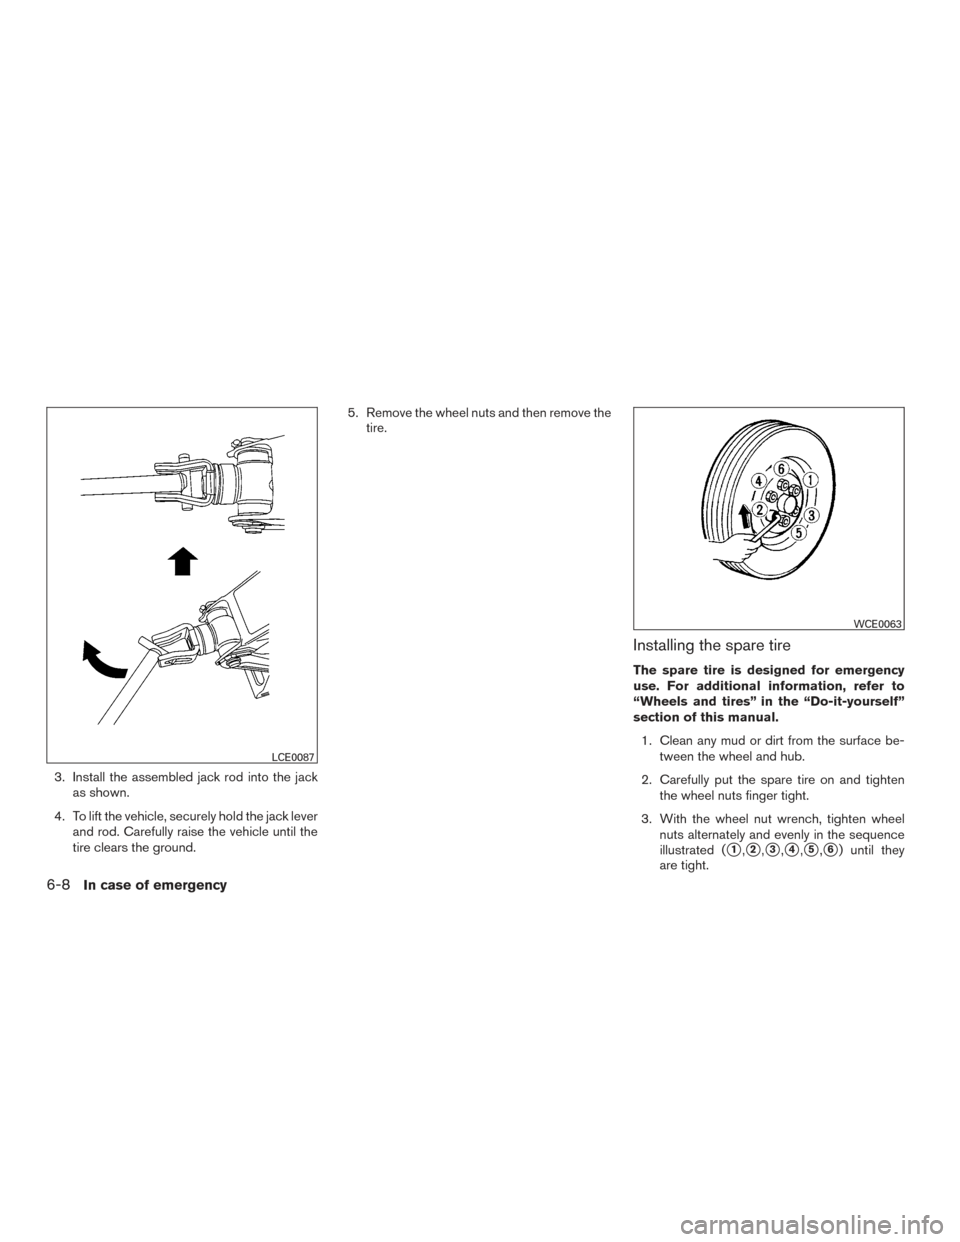 NISSAN TITAN 2016 2.G User Guide 3. Install the assembled jack rod into the jackas shown.
4. To lift the vehicle, securely hold the jack lever and rod. Carefully raise the vehicle until the
tire clears the ground. 5. Remove the wheel